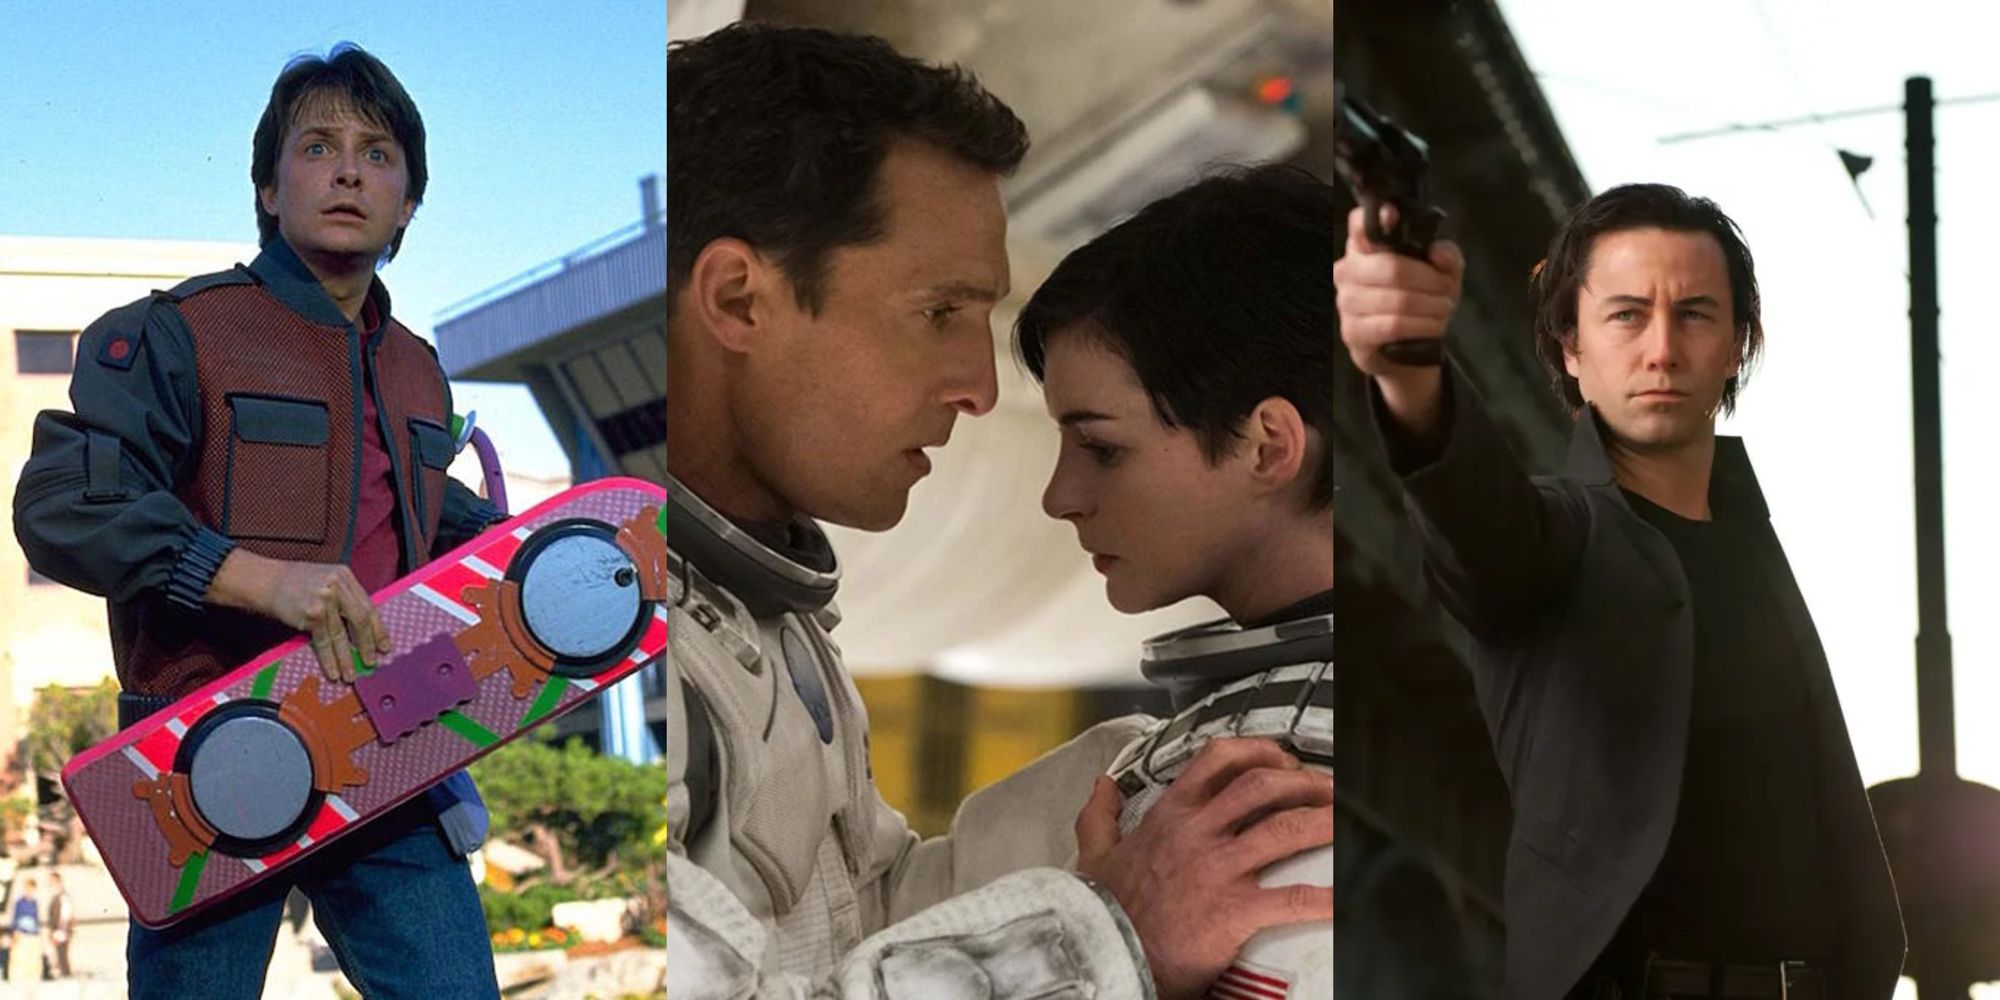 Back To The Future, Interstellar and Looper